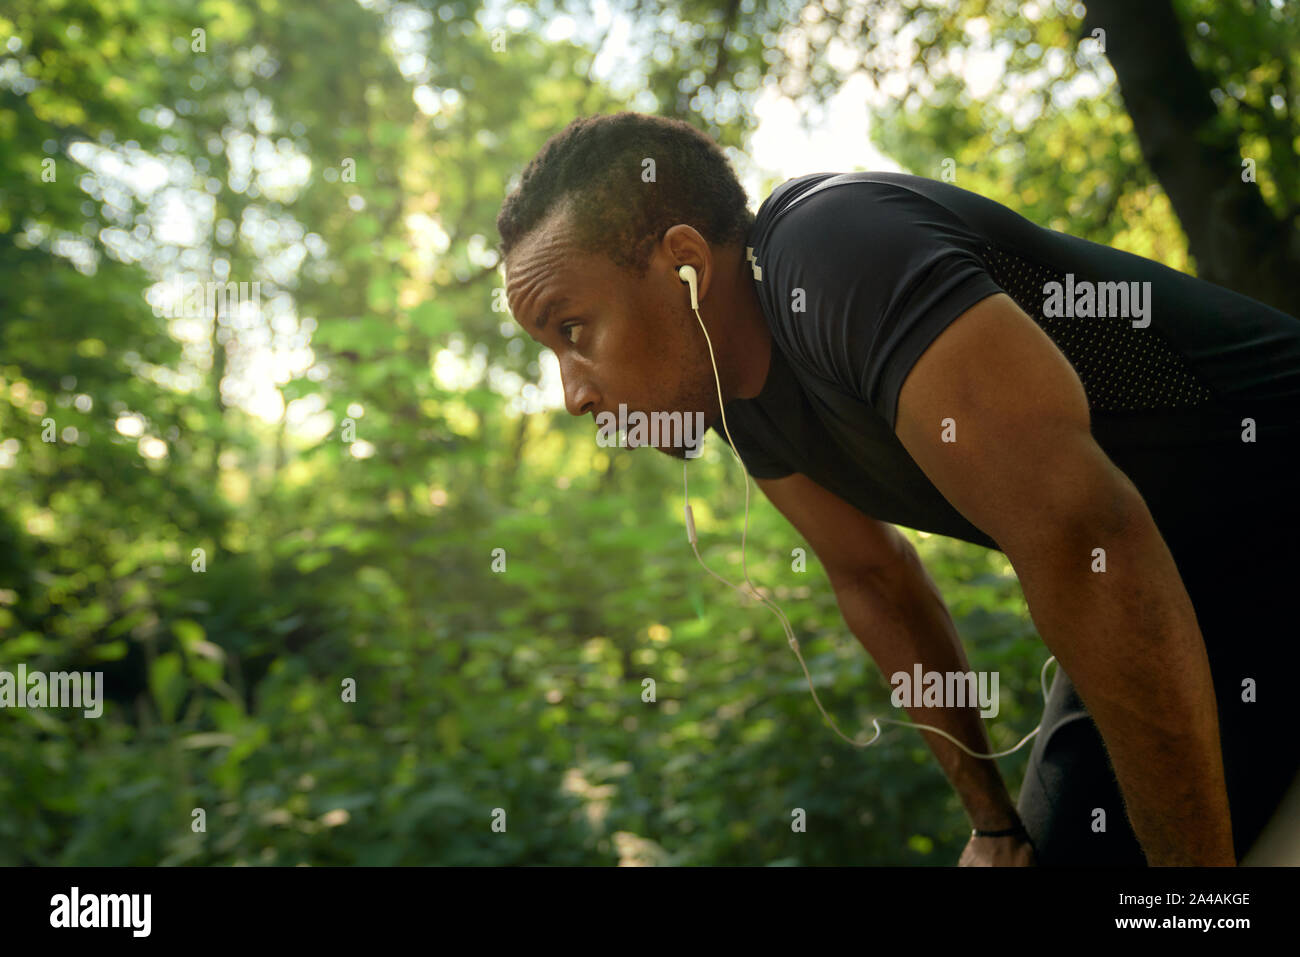 Muscular runner in black t shirt standing, leaning on knees. African sportsman training in forest and listening music with headphones. Concept of workout and motivation. Stock Photo